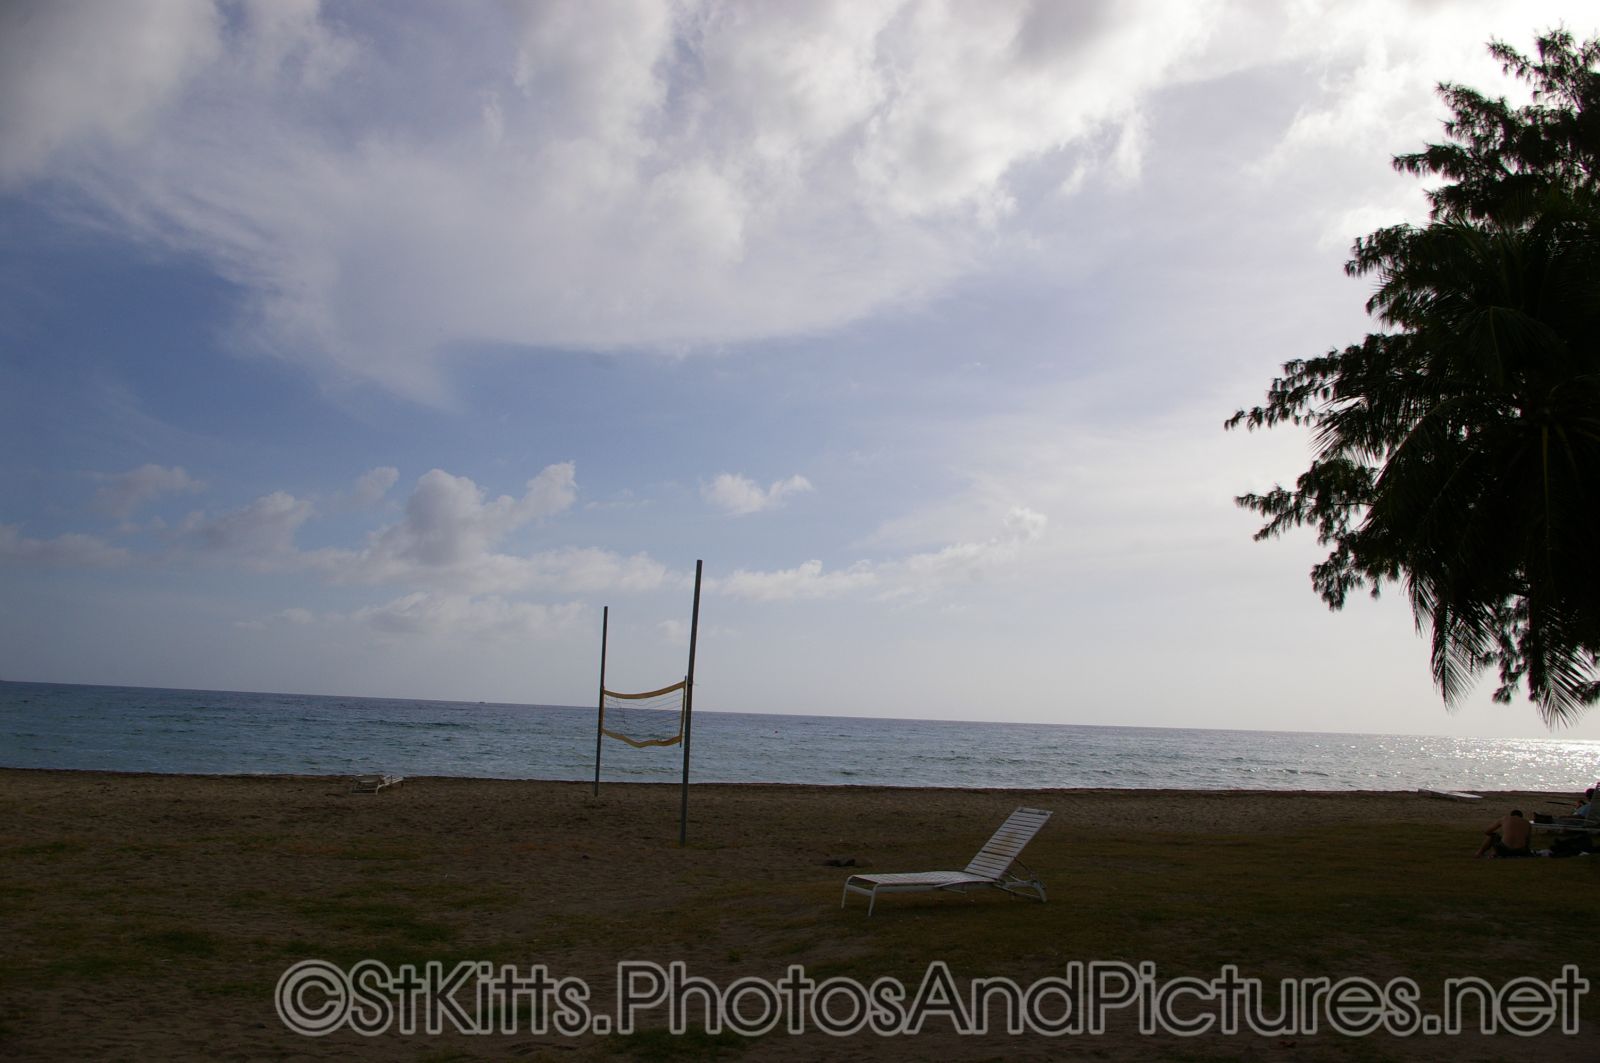 Empty beach chair and volley ball net at a beach in Frigate Bay St Kitts.jpg
